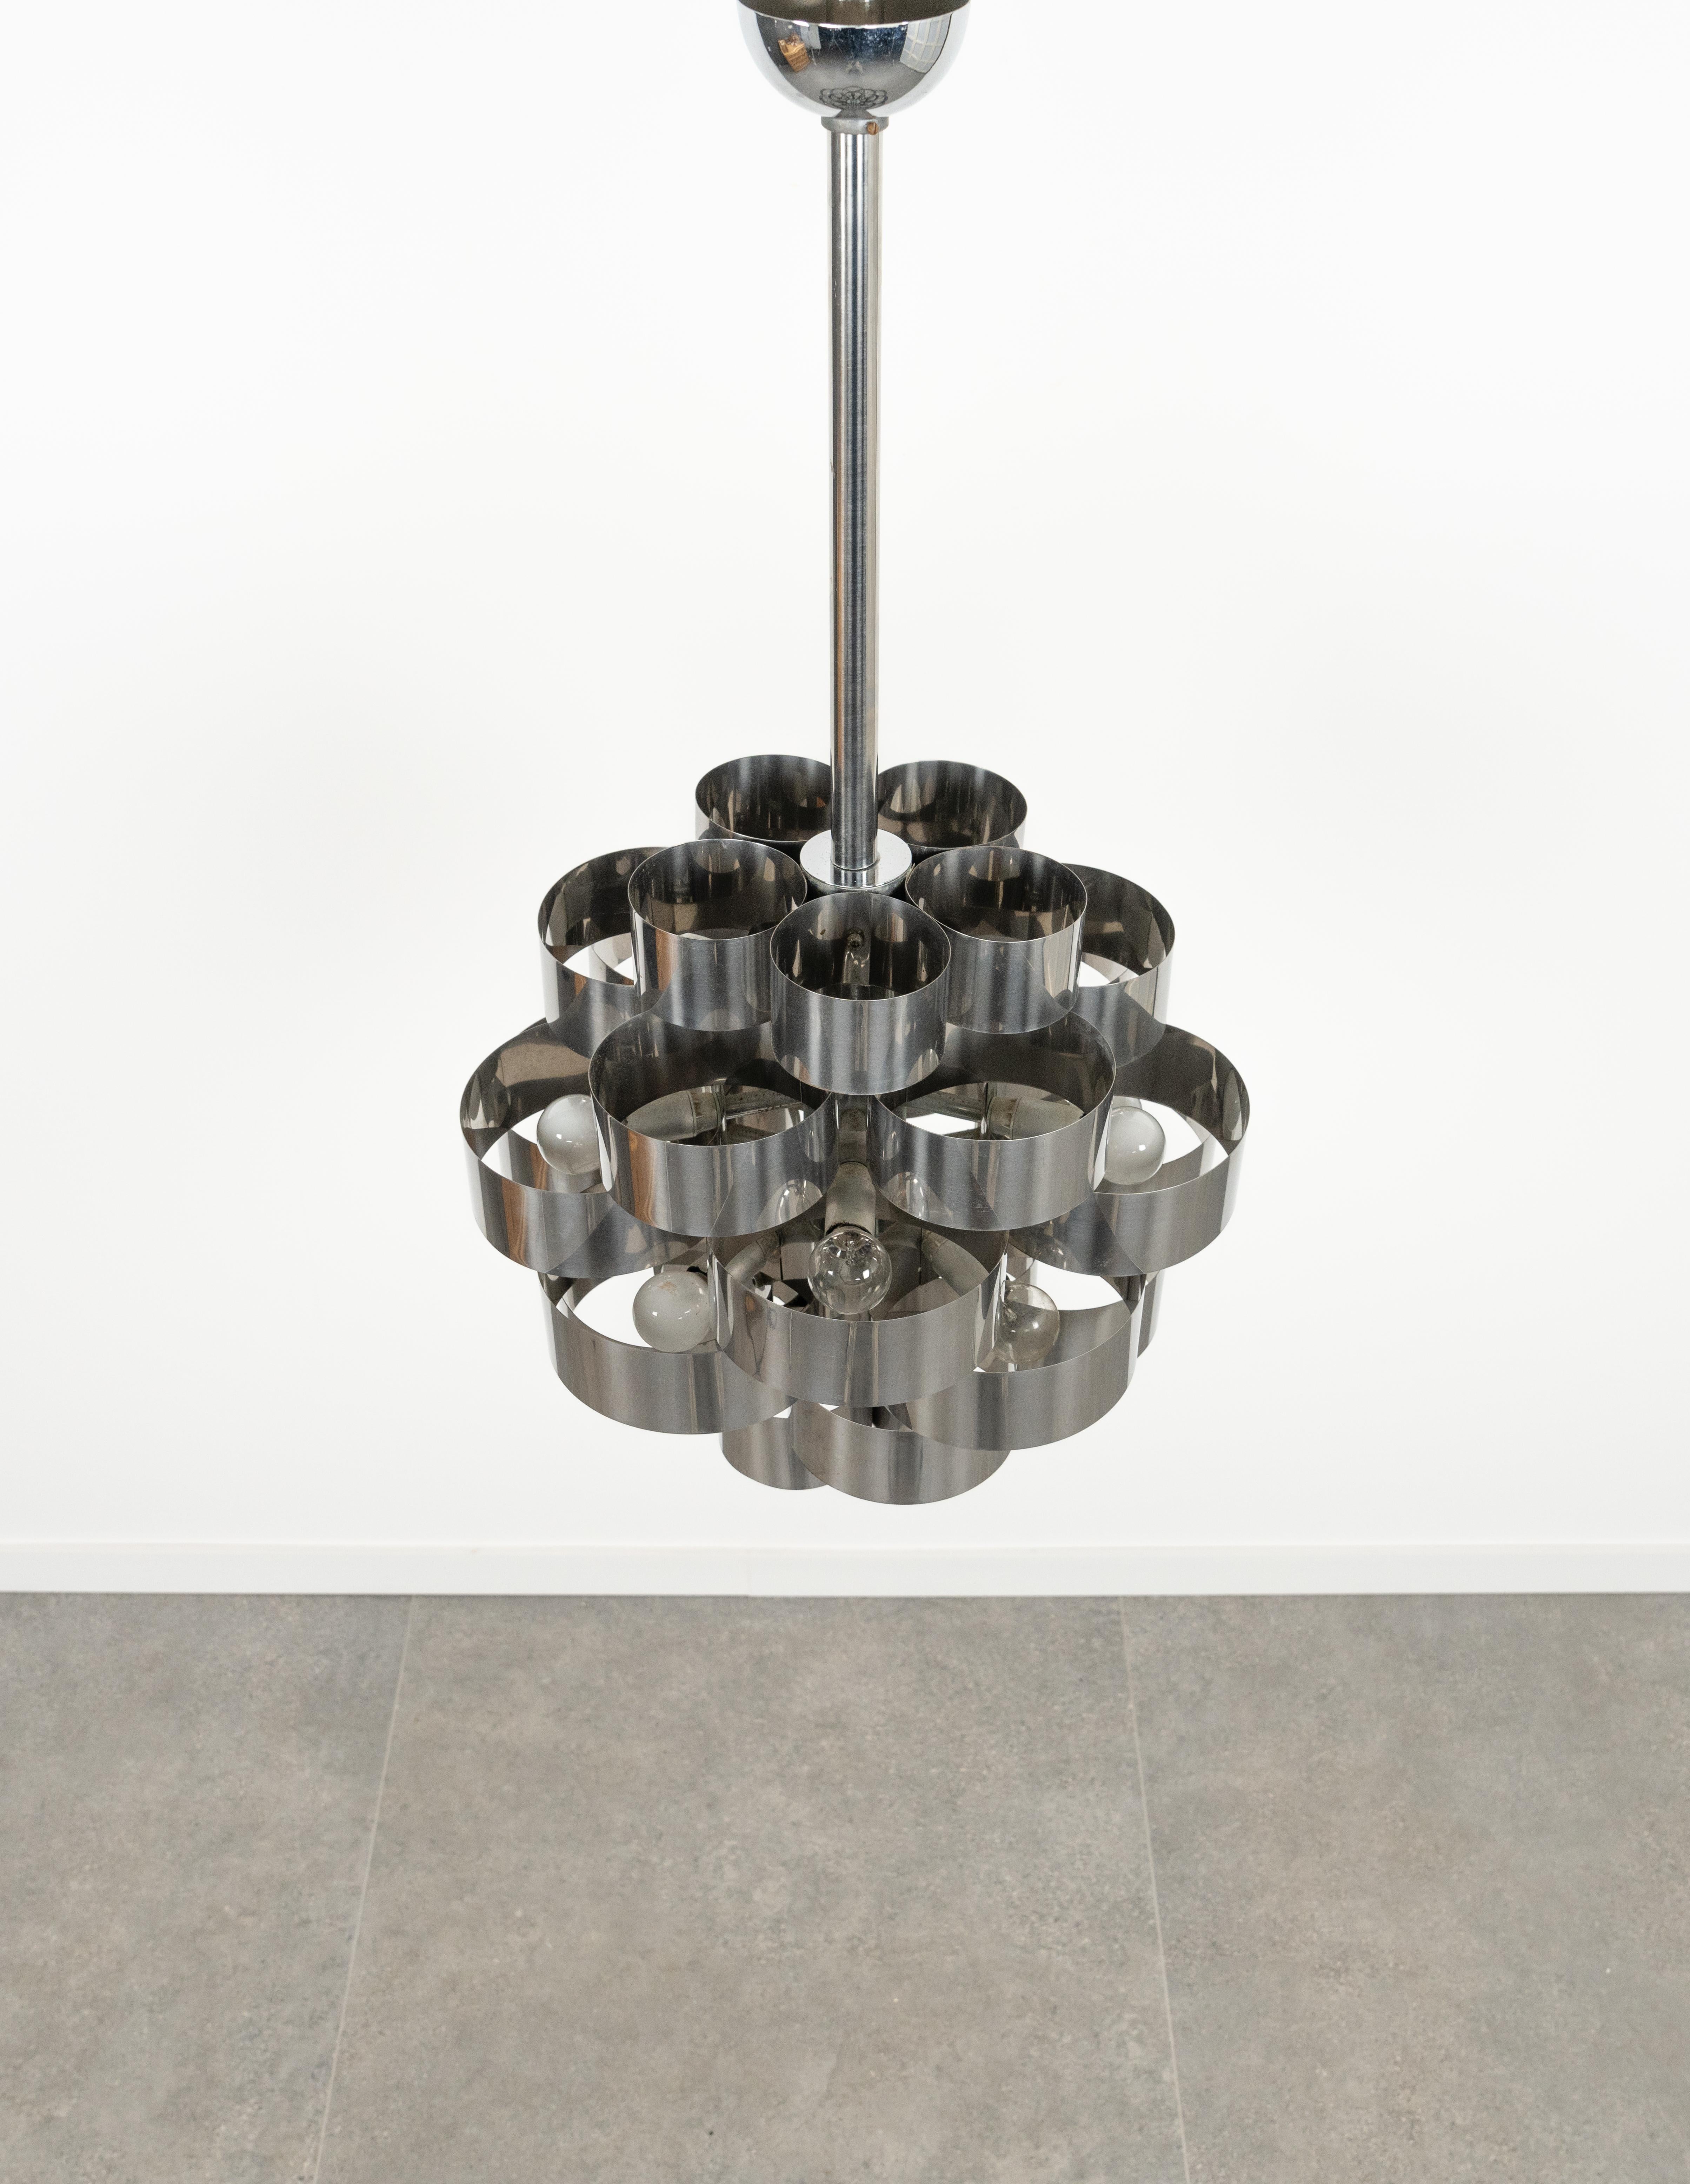 Midcentury Chandelier Aluminum and Steel by Max Sauze for Sciolari, Italy 1970s For Sale 1